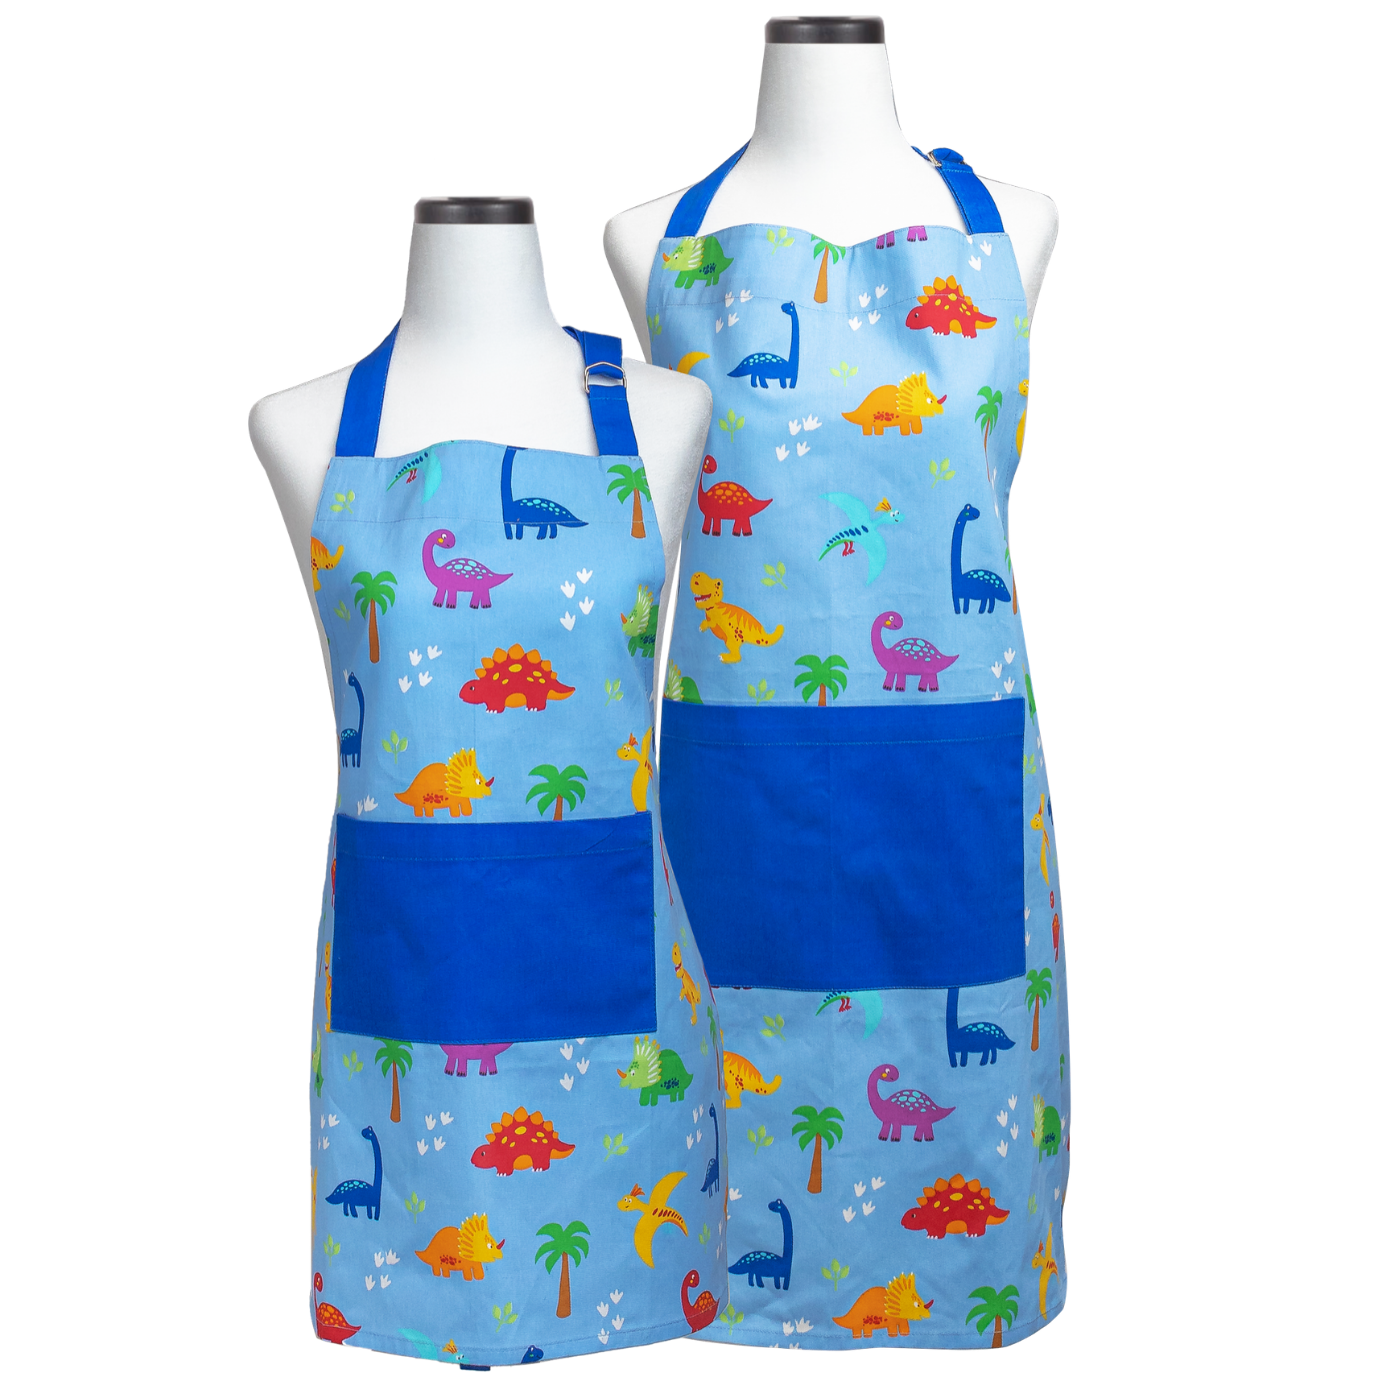  Handstand Kitchen Mother and Daughter Rainbows and Unicorns  100% Cotton Apron Set: Home & Kitchen